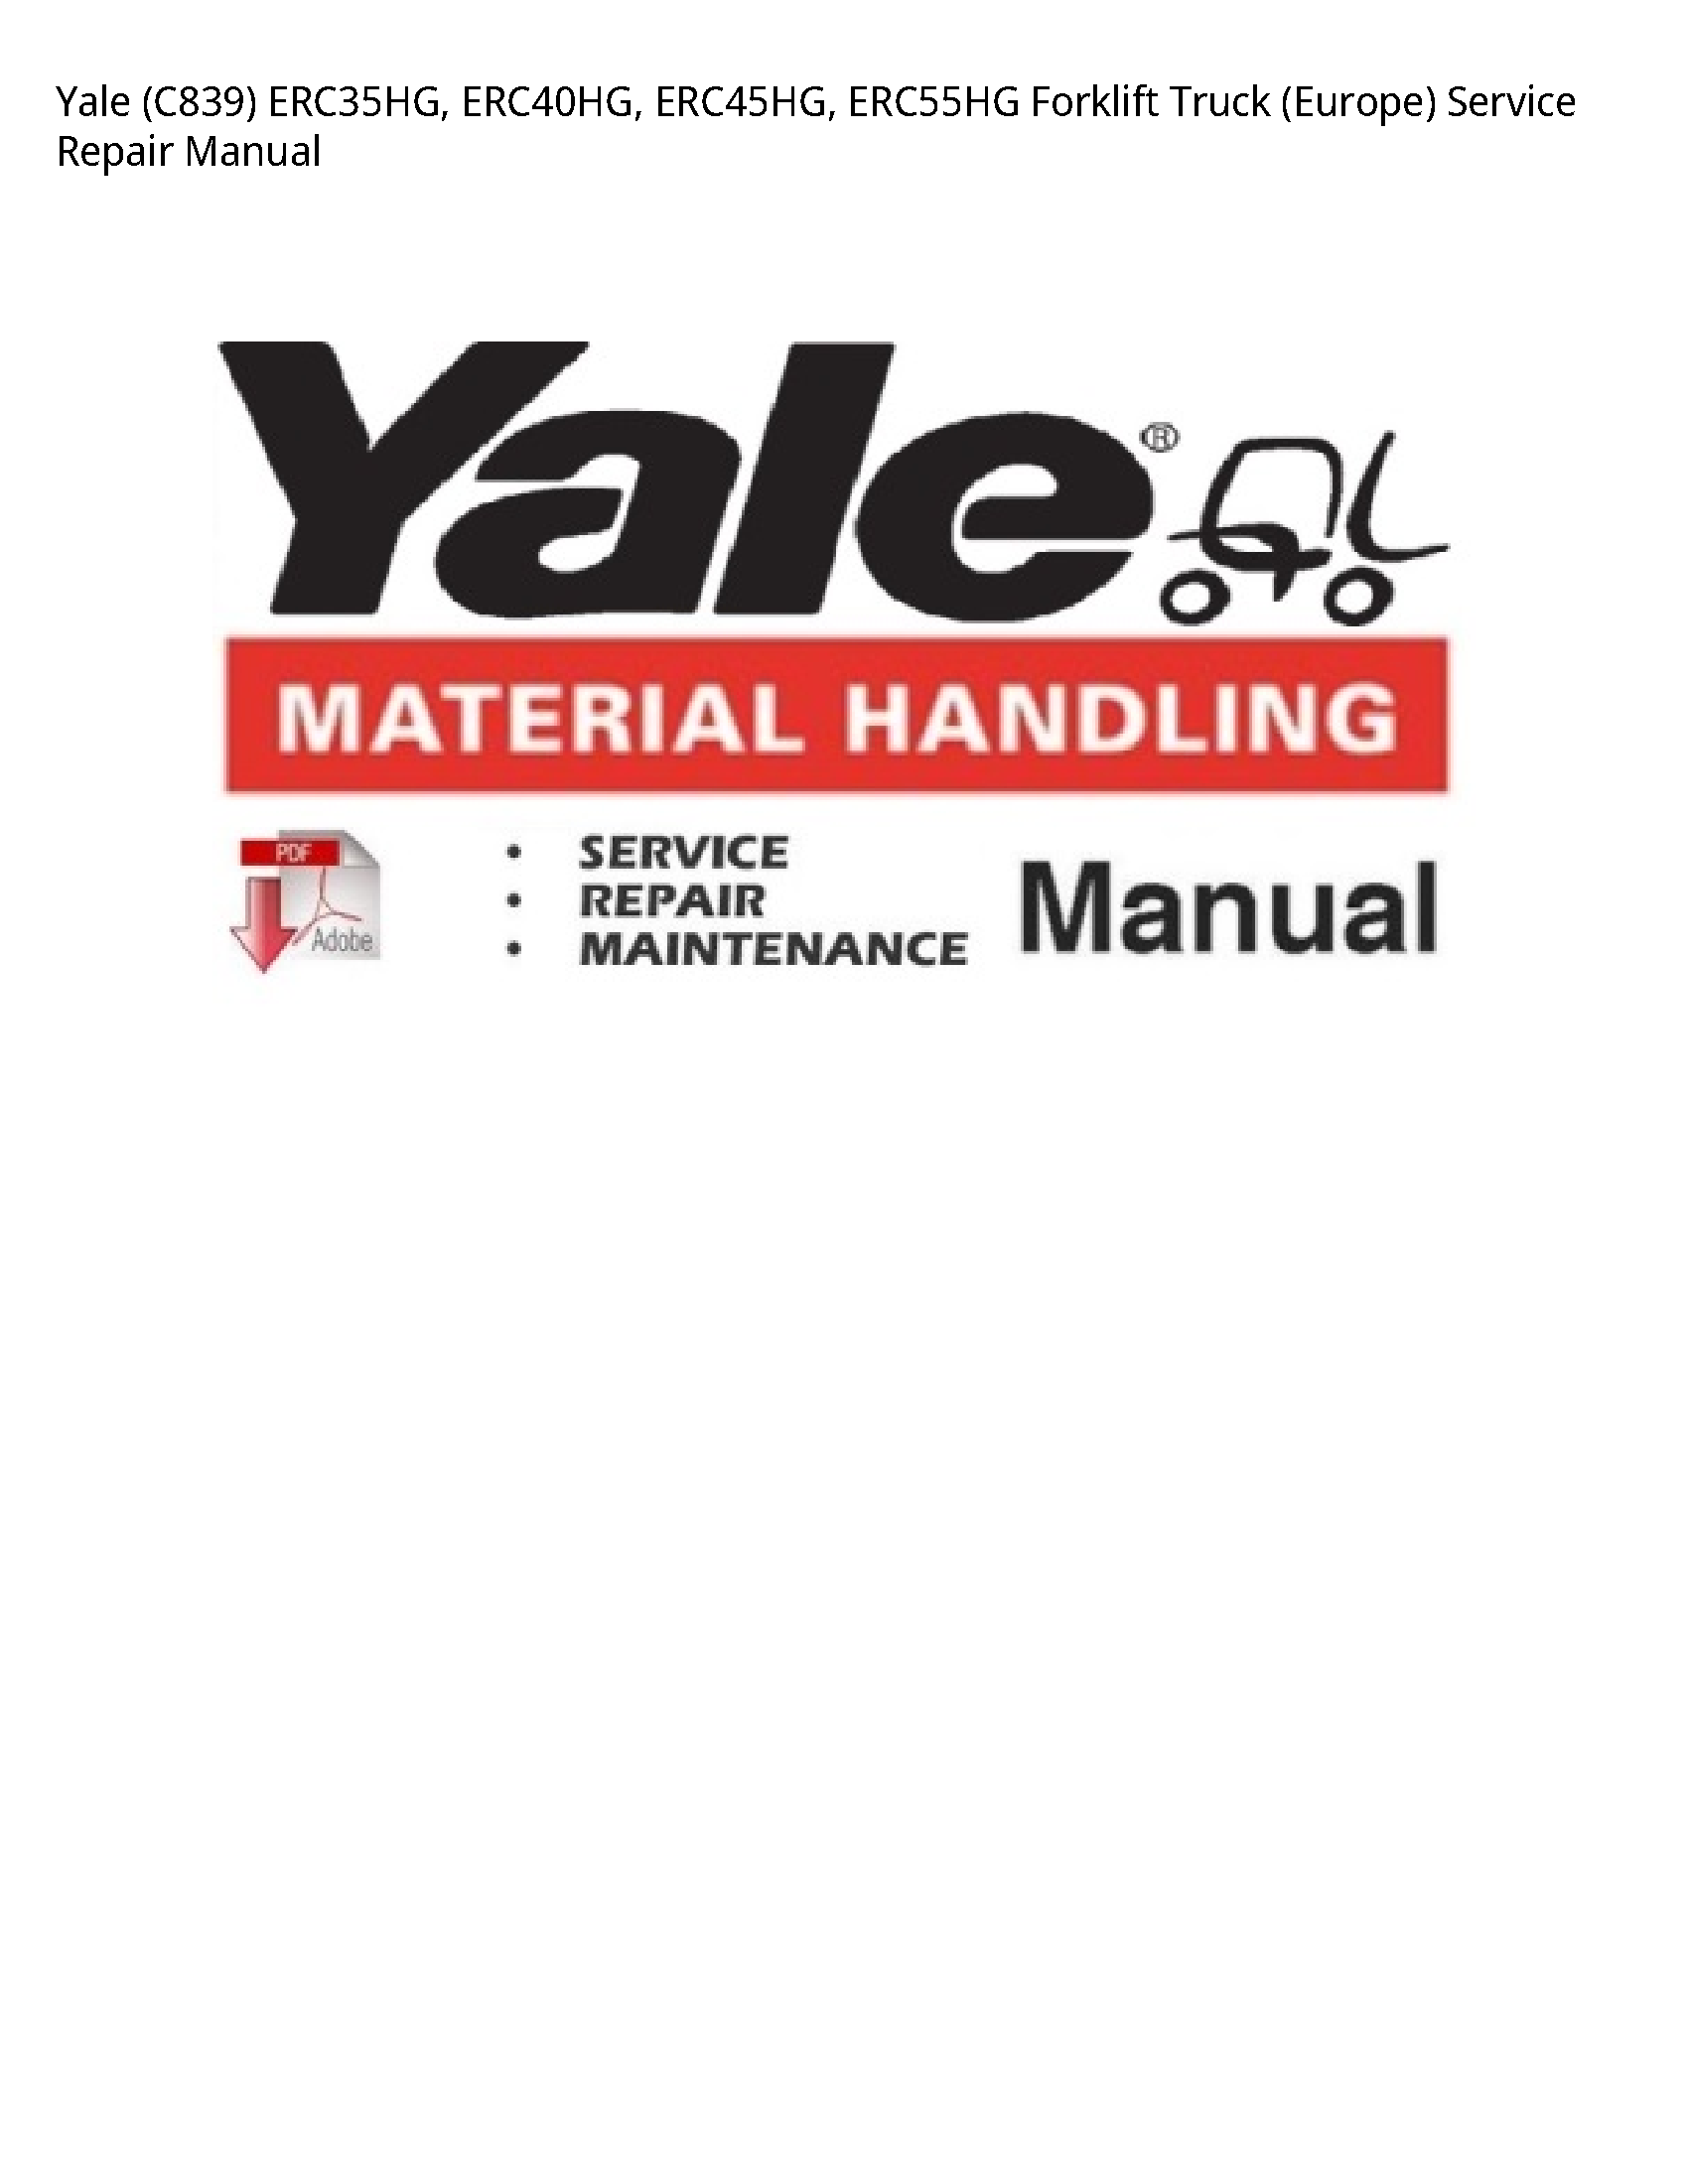 Yale (C839) Forklift Truck (Europe) manual